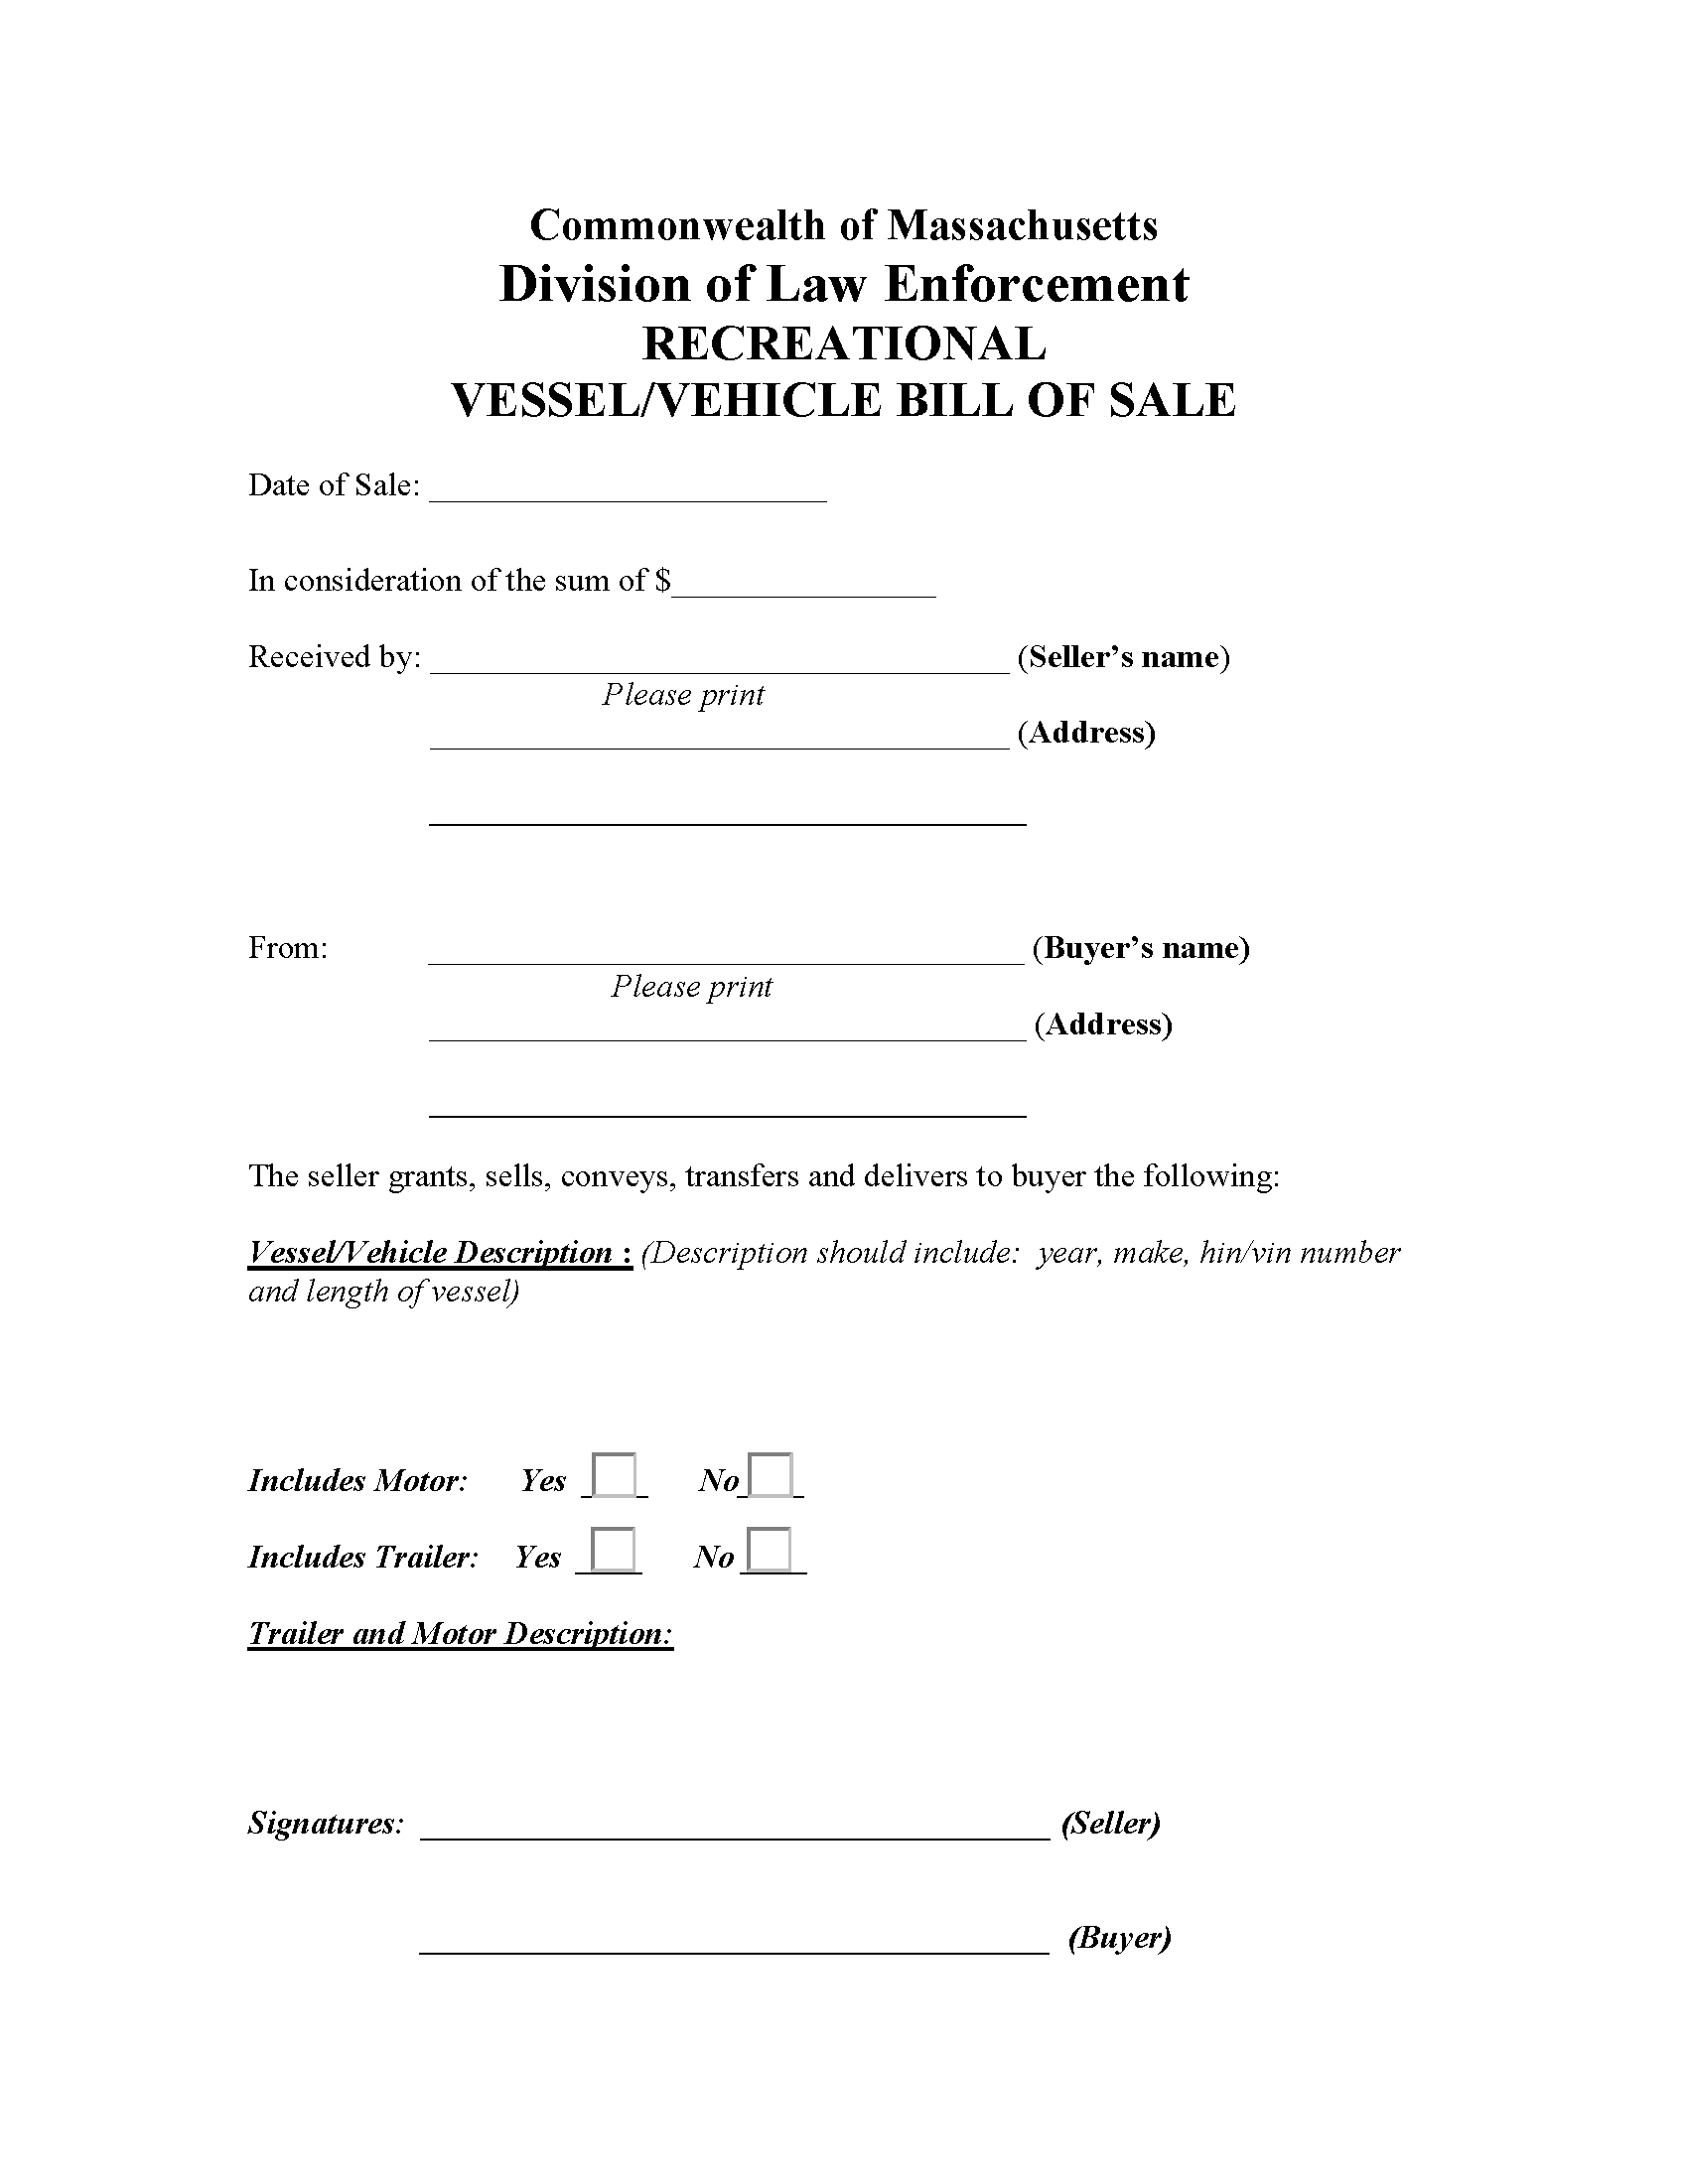 Free Massachusetts Bill of Sale Forms - PDF  Word Intended For Vehicle Bill Of Sale Template Word